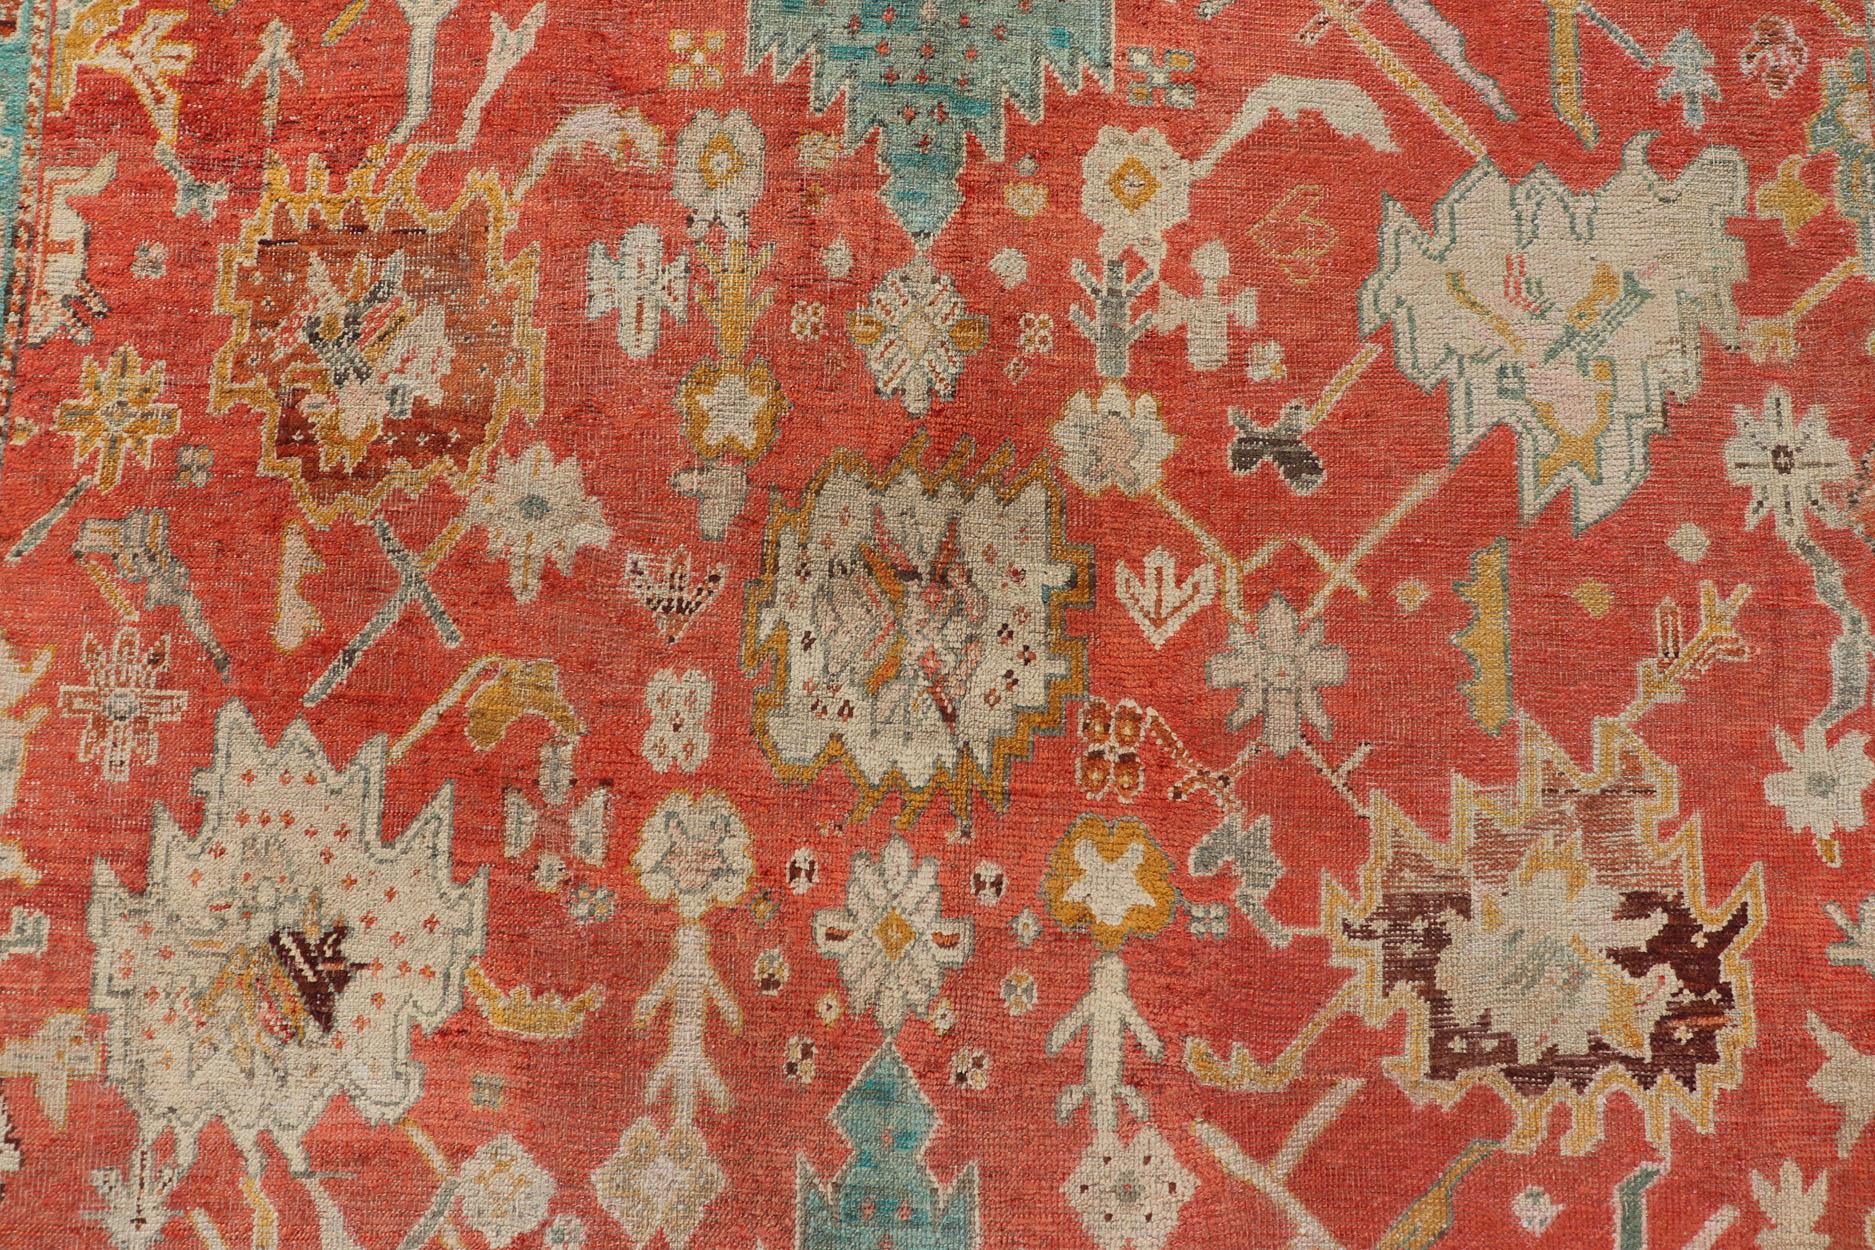 Antique Turkish Oushak In Tribal Motifs in Soft Coral, Blue, Marigold, and Cream For Sale 9